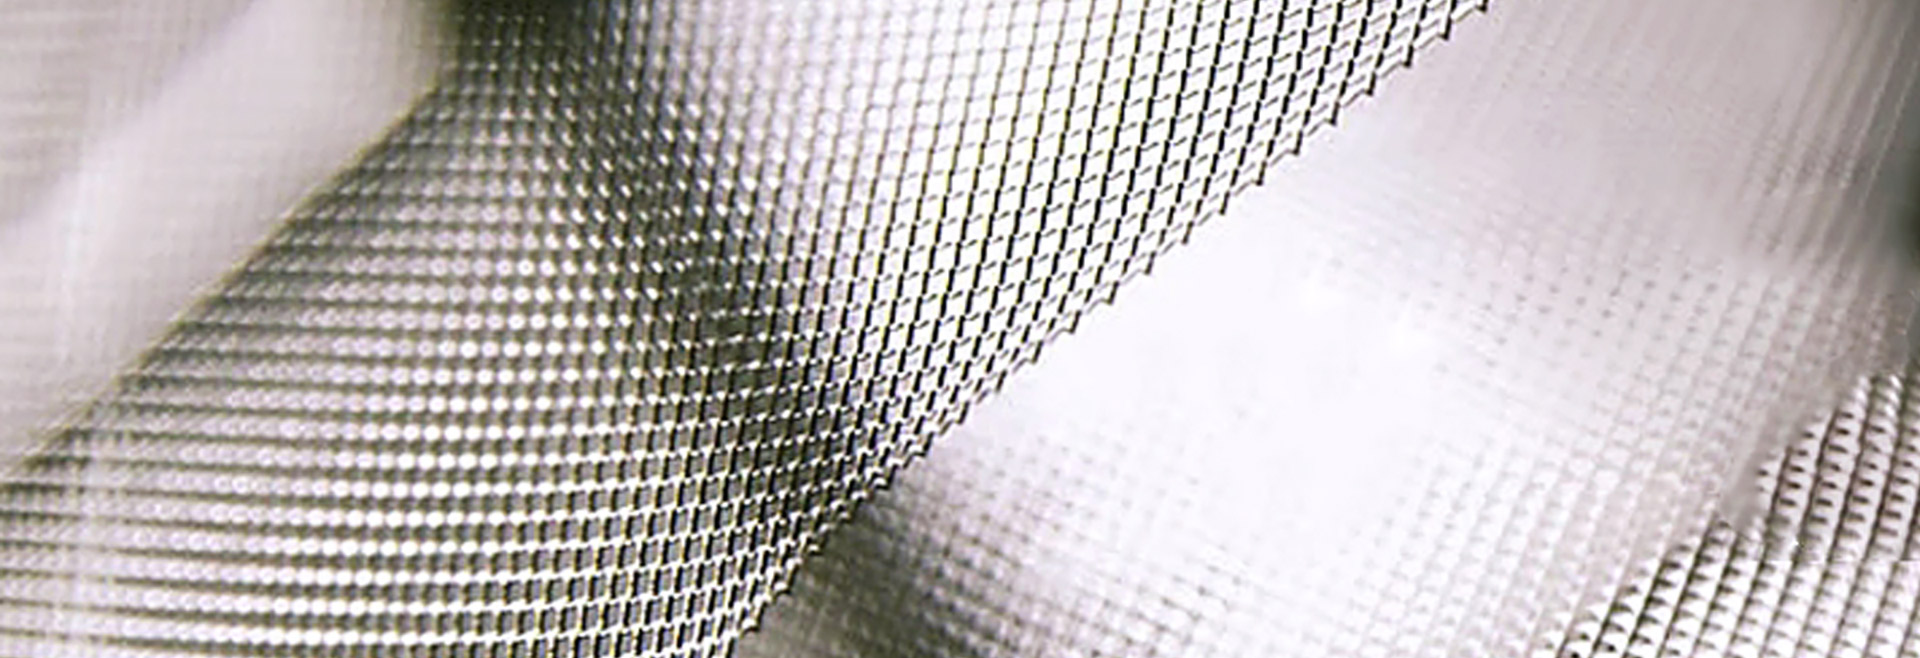 Micro Expanded Metal Mesh, High Conductivity & Refraction Ability